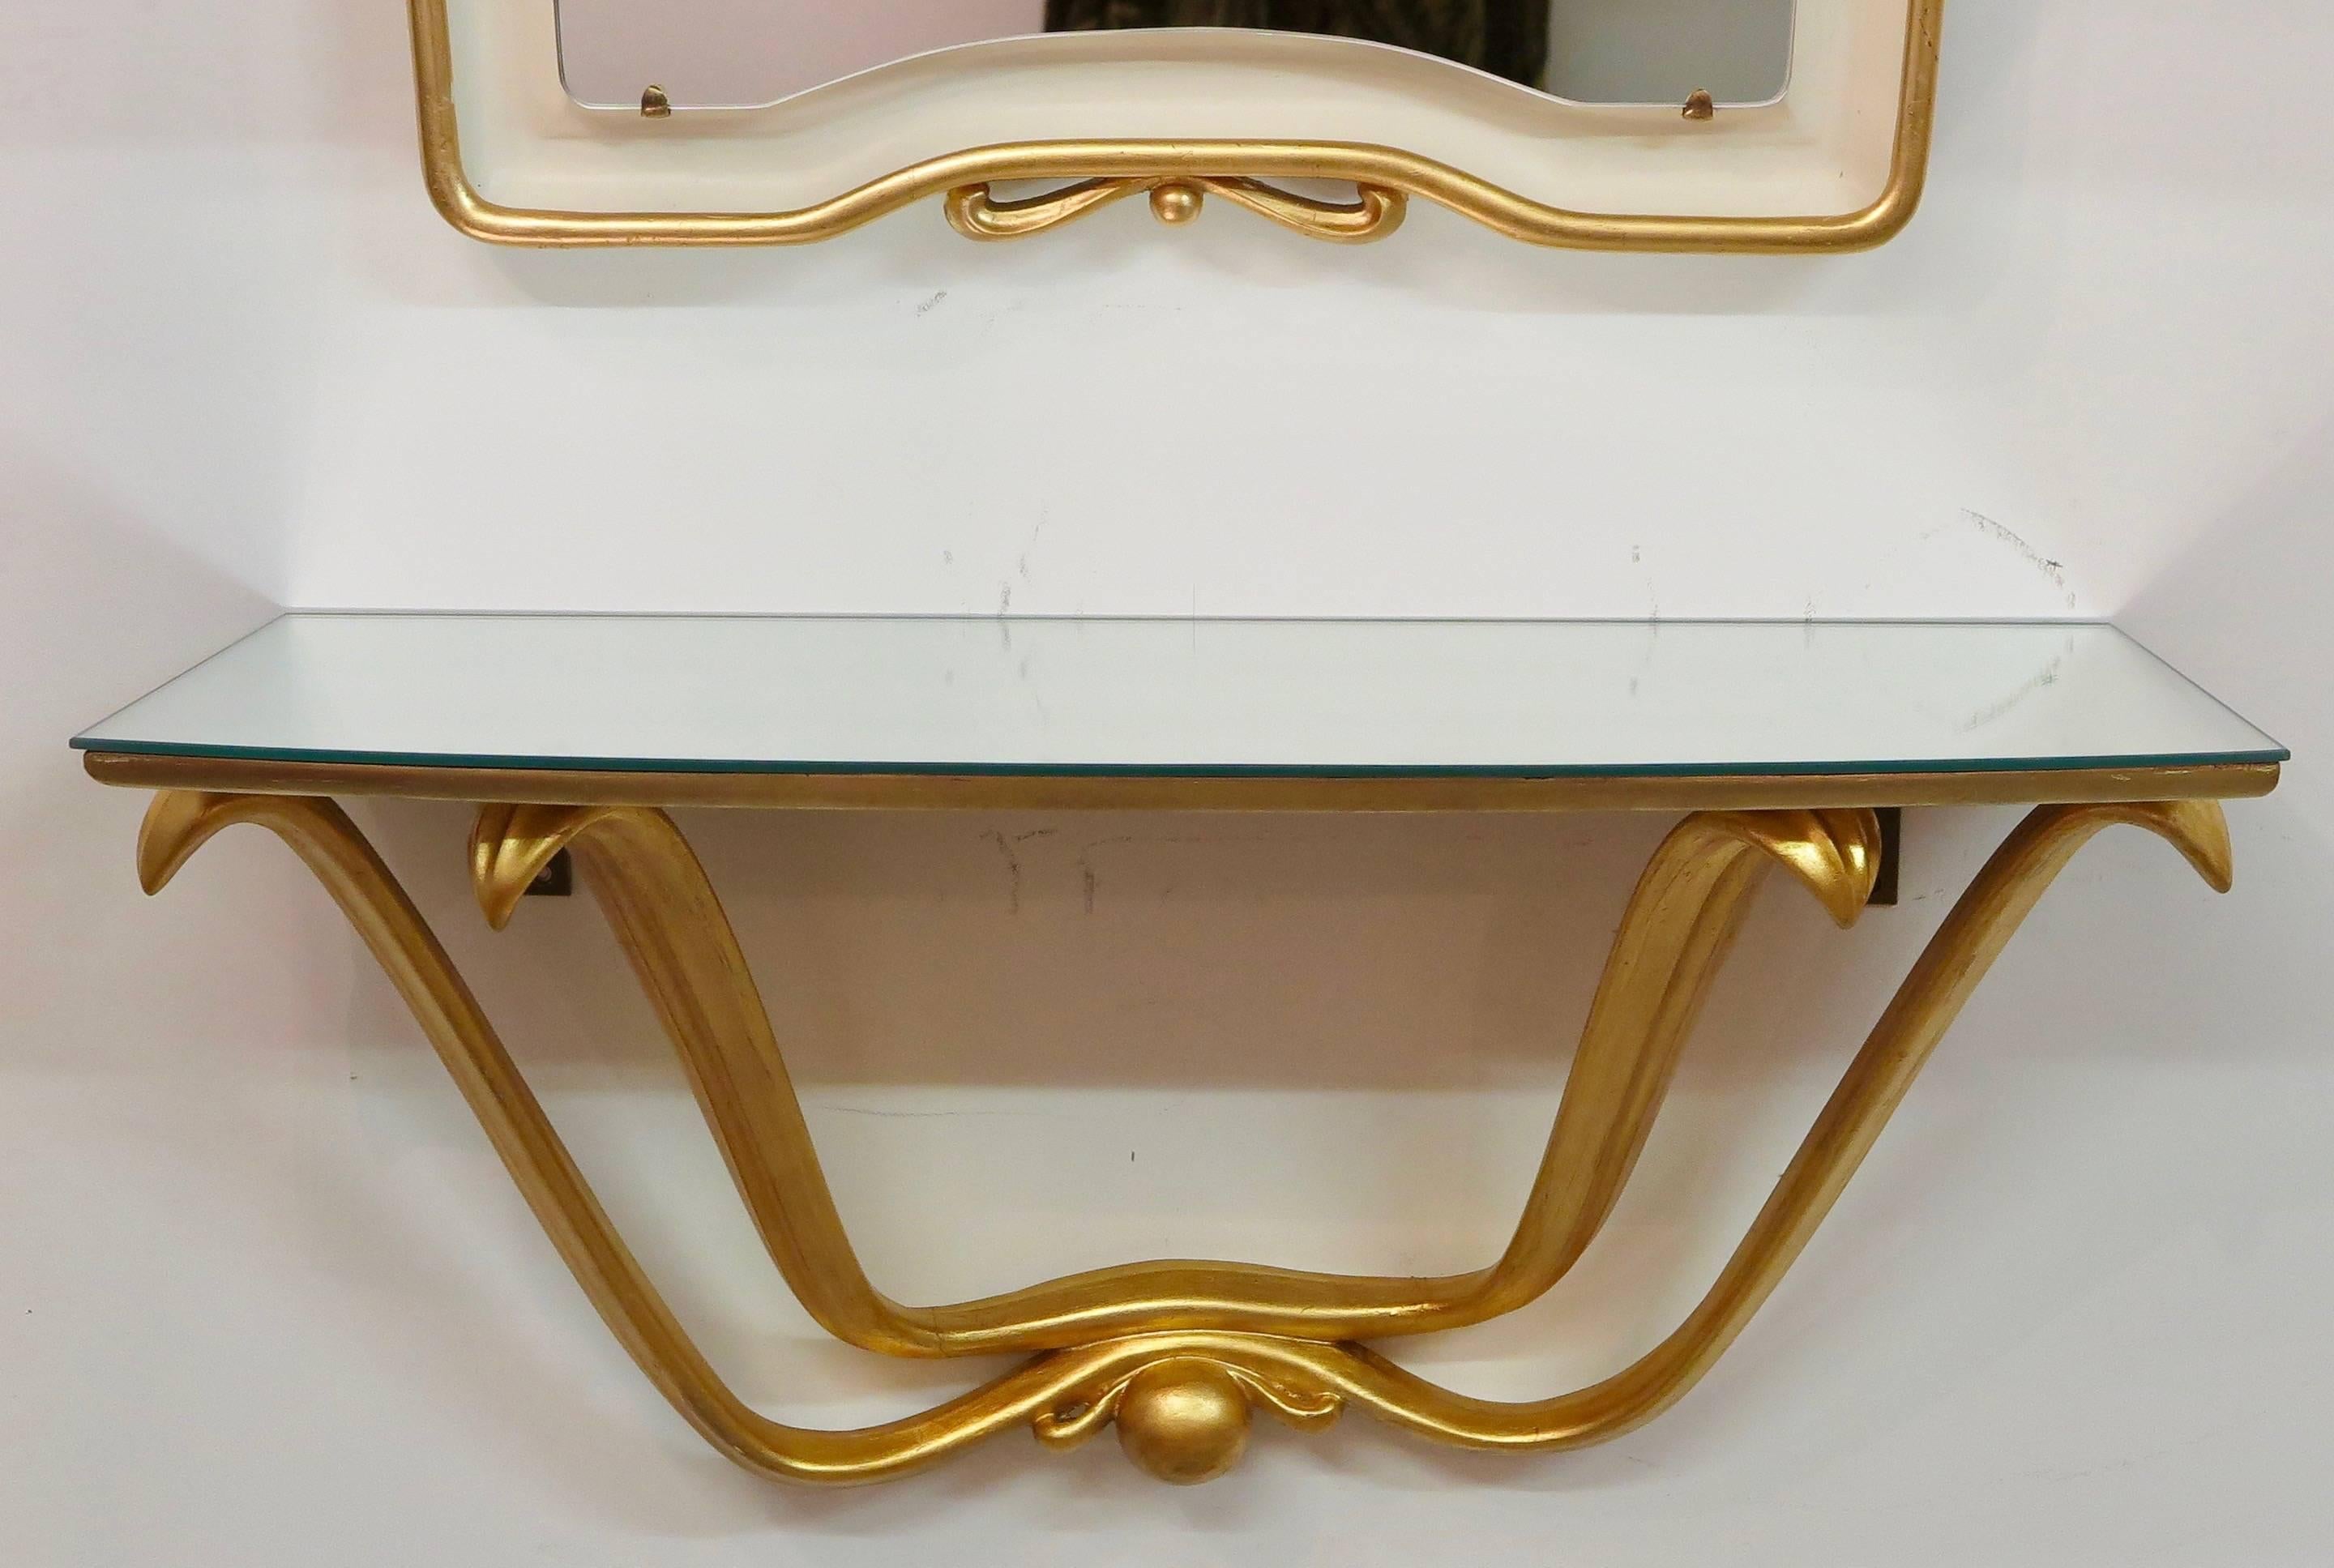 Gilded mirror and gilded console with mirrored top by Osvaldo Borsani, Italy, circa 1946.